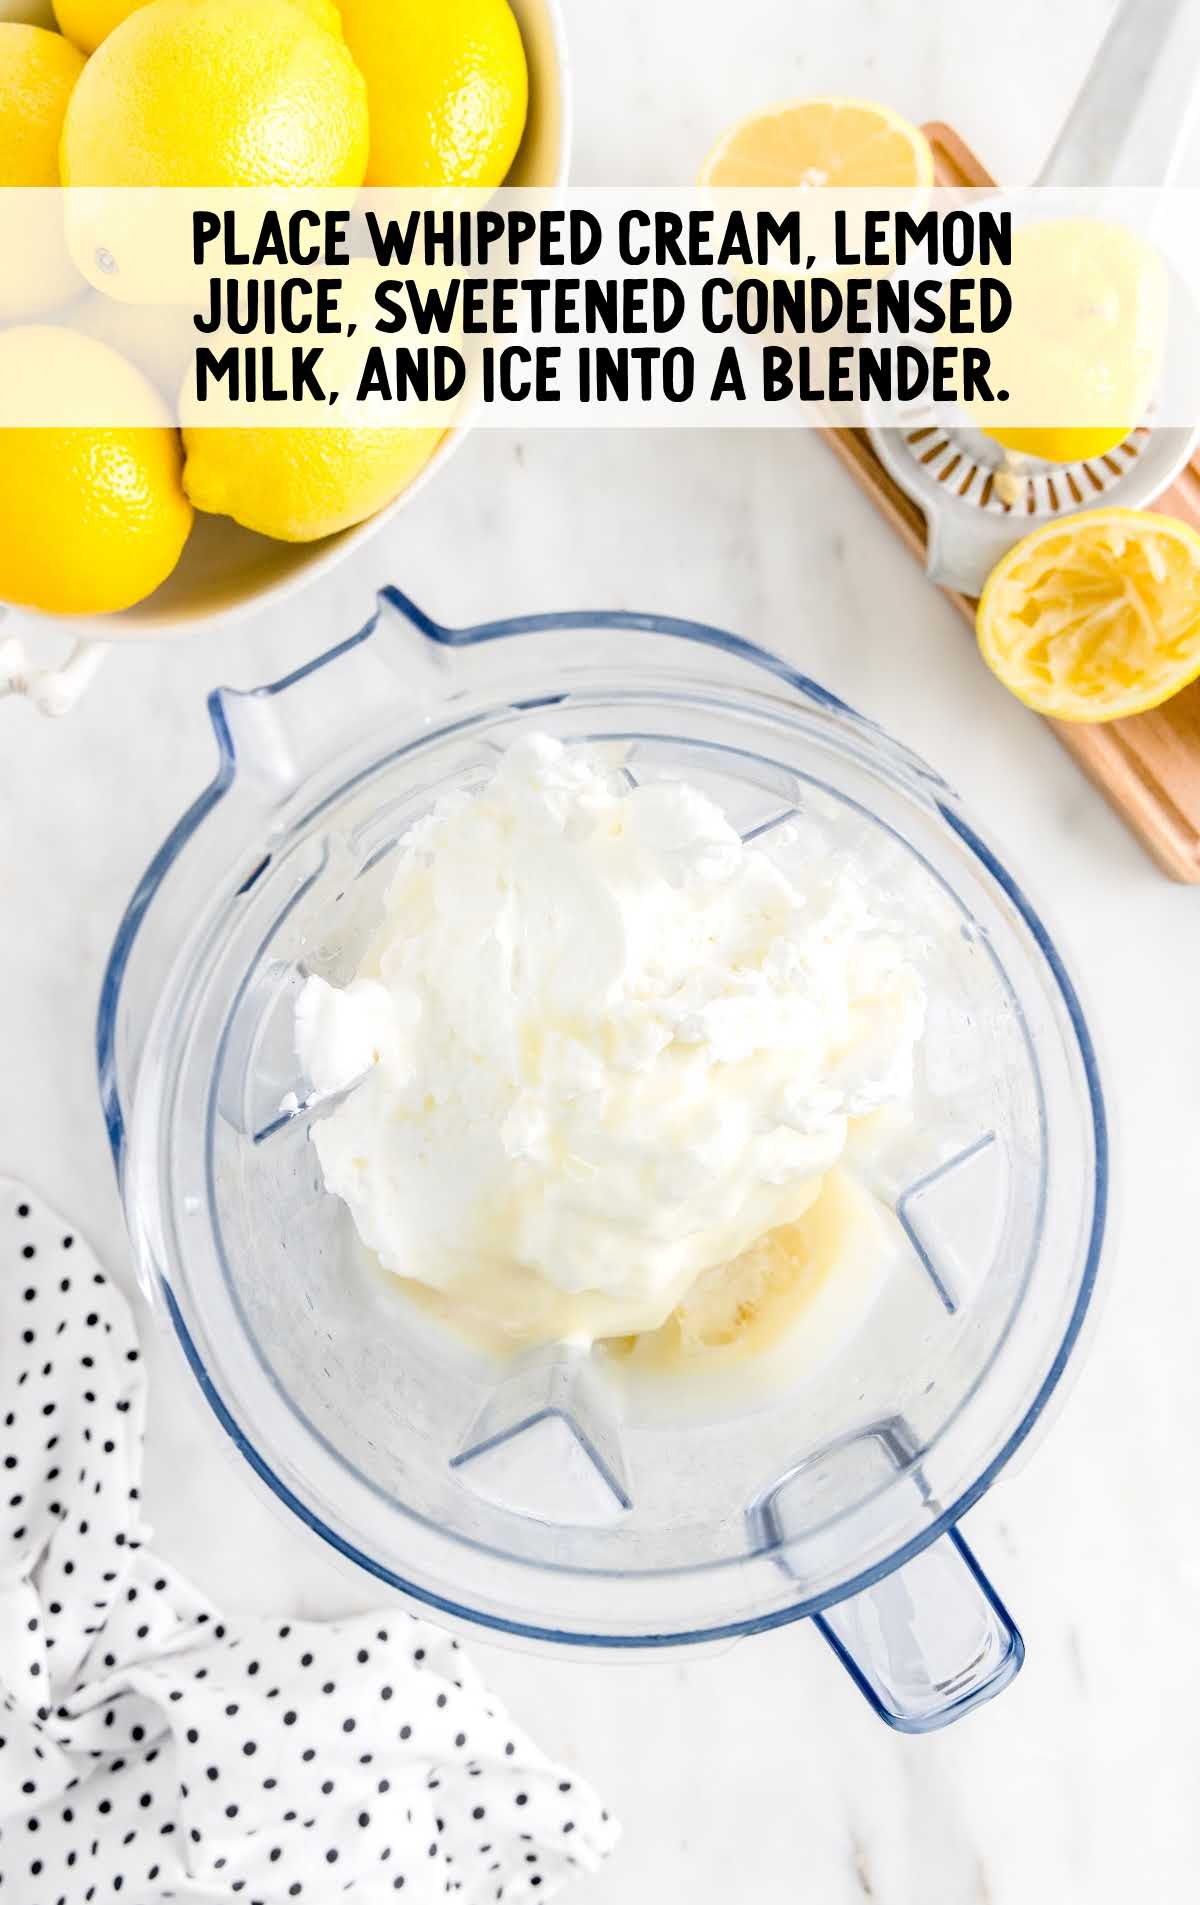 whipped cream, lemon juice, sweetened condensed milk, and ice placed in a blender